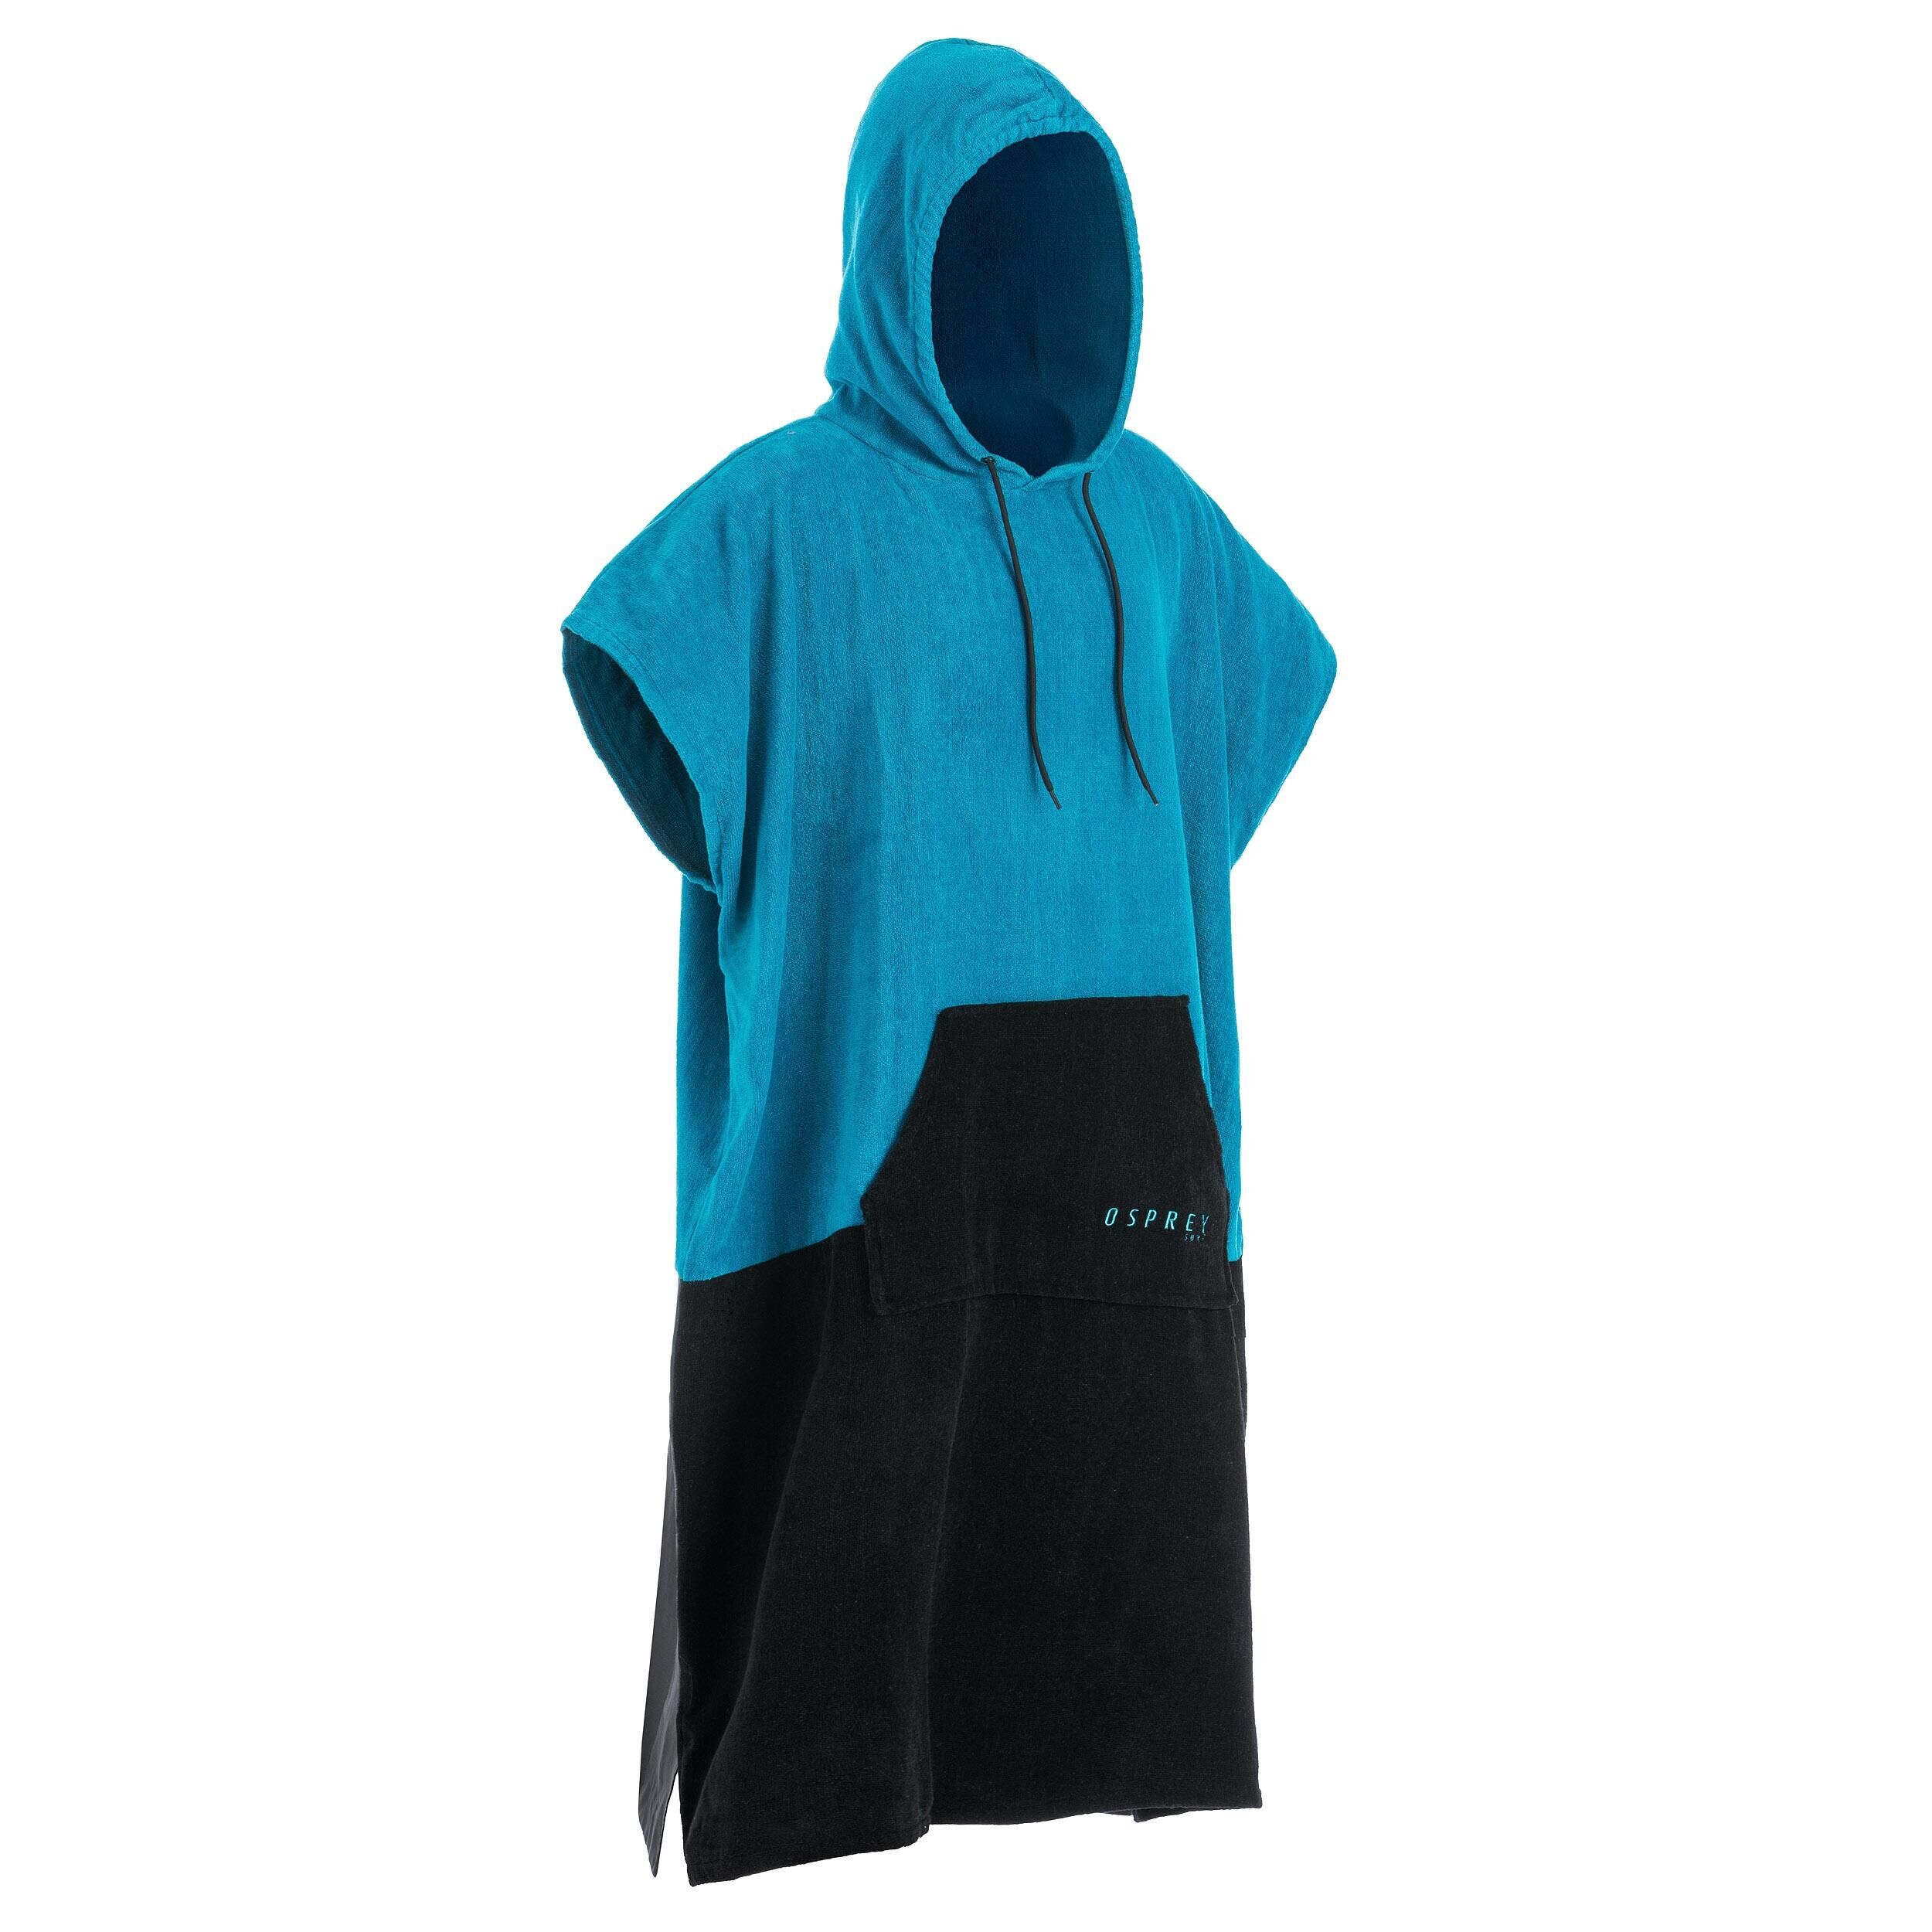 OSPREY ACTION SPORTS Osprey Adult Surf Poncho Hooded Towel Beach Changing Robe, Blue